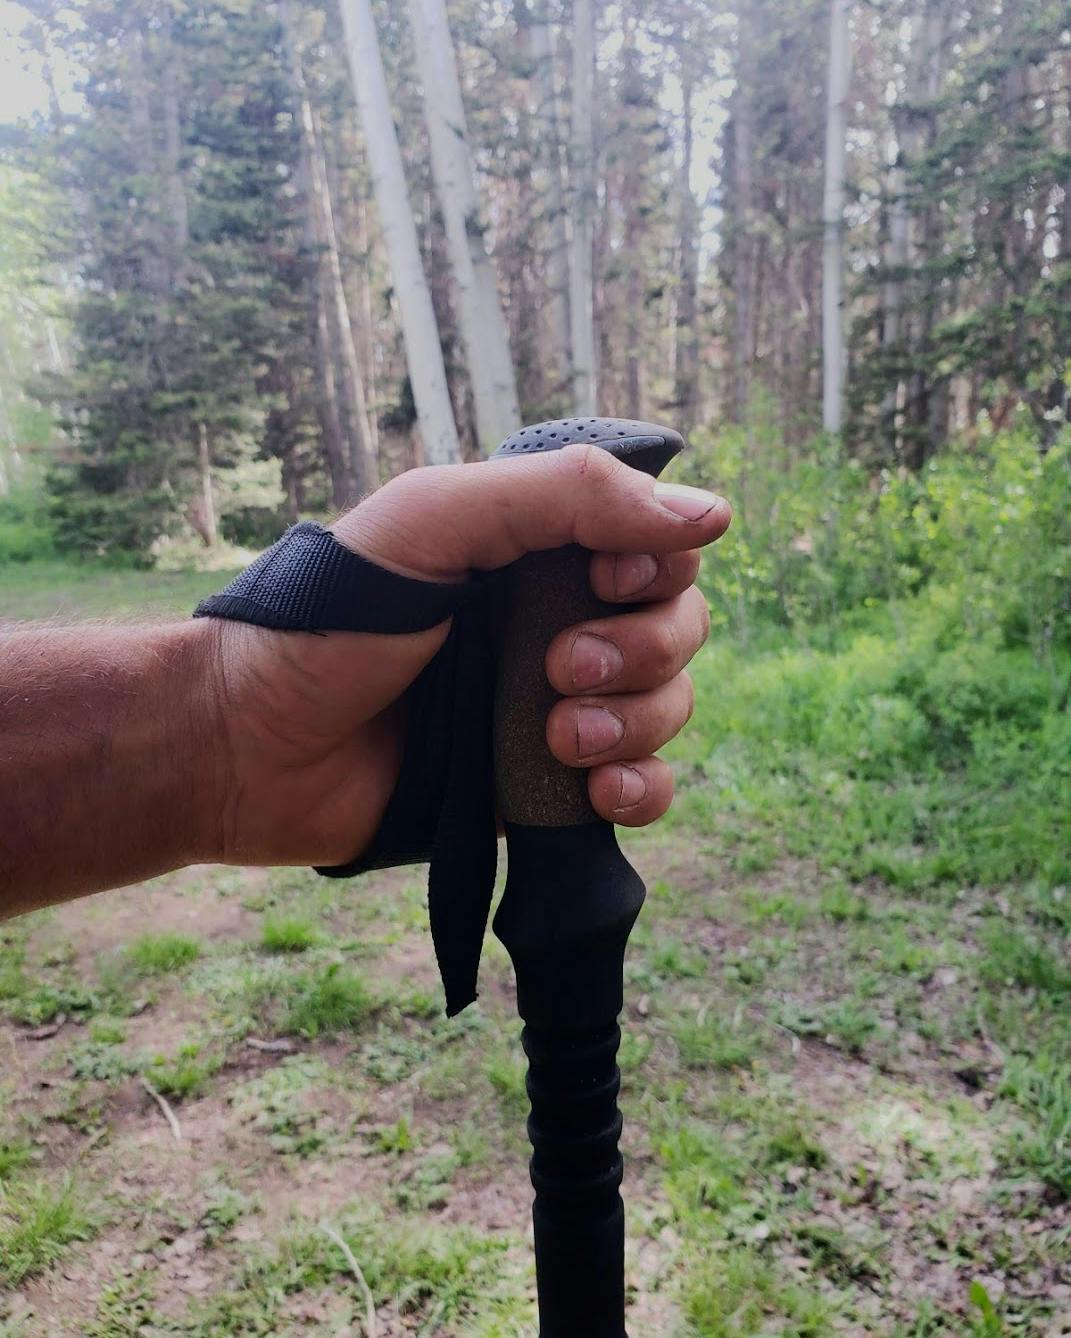 A hand holds a trekking pole equipped with a wrist strap